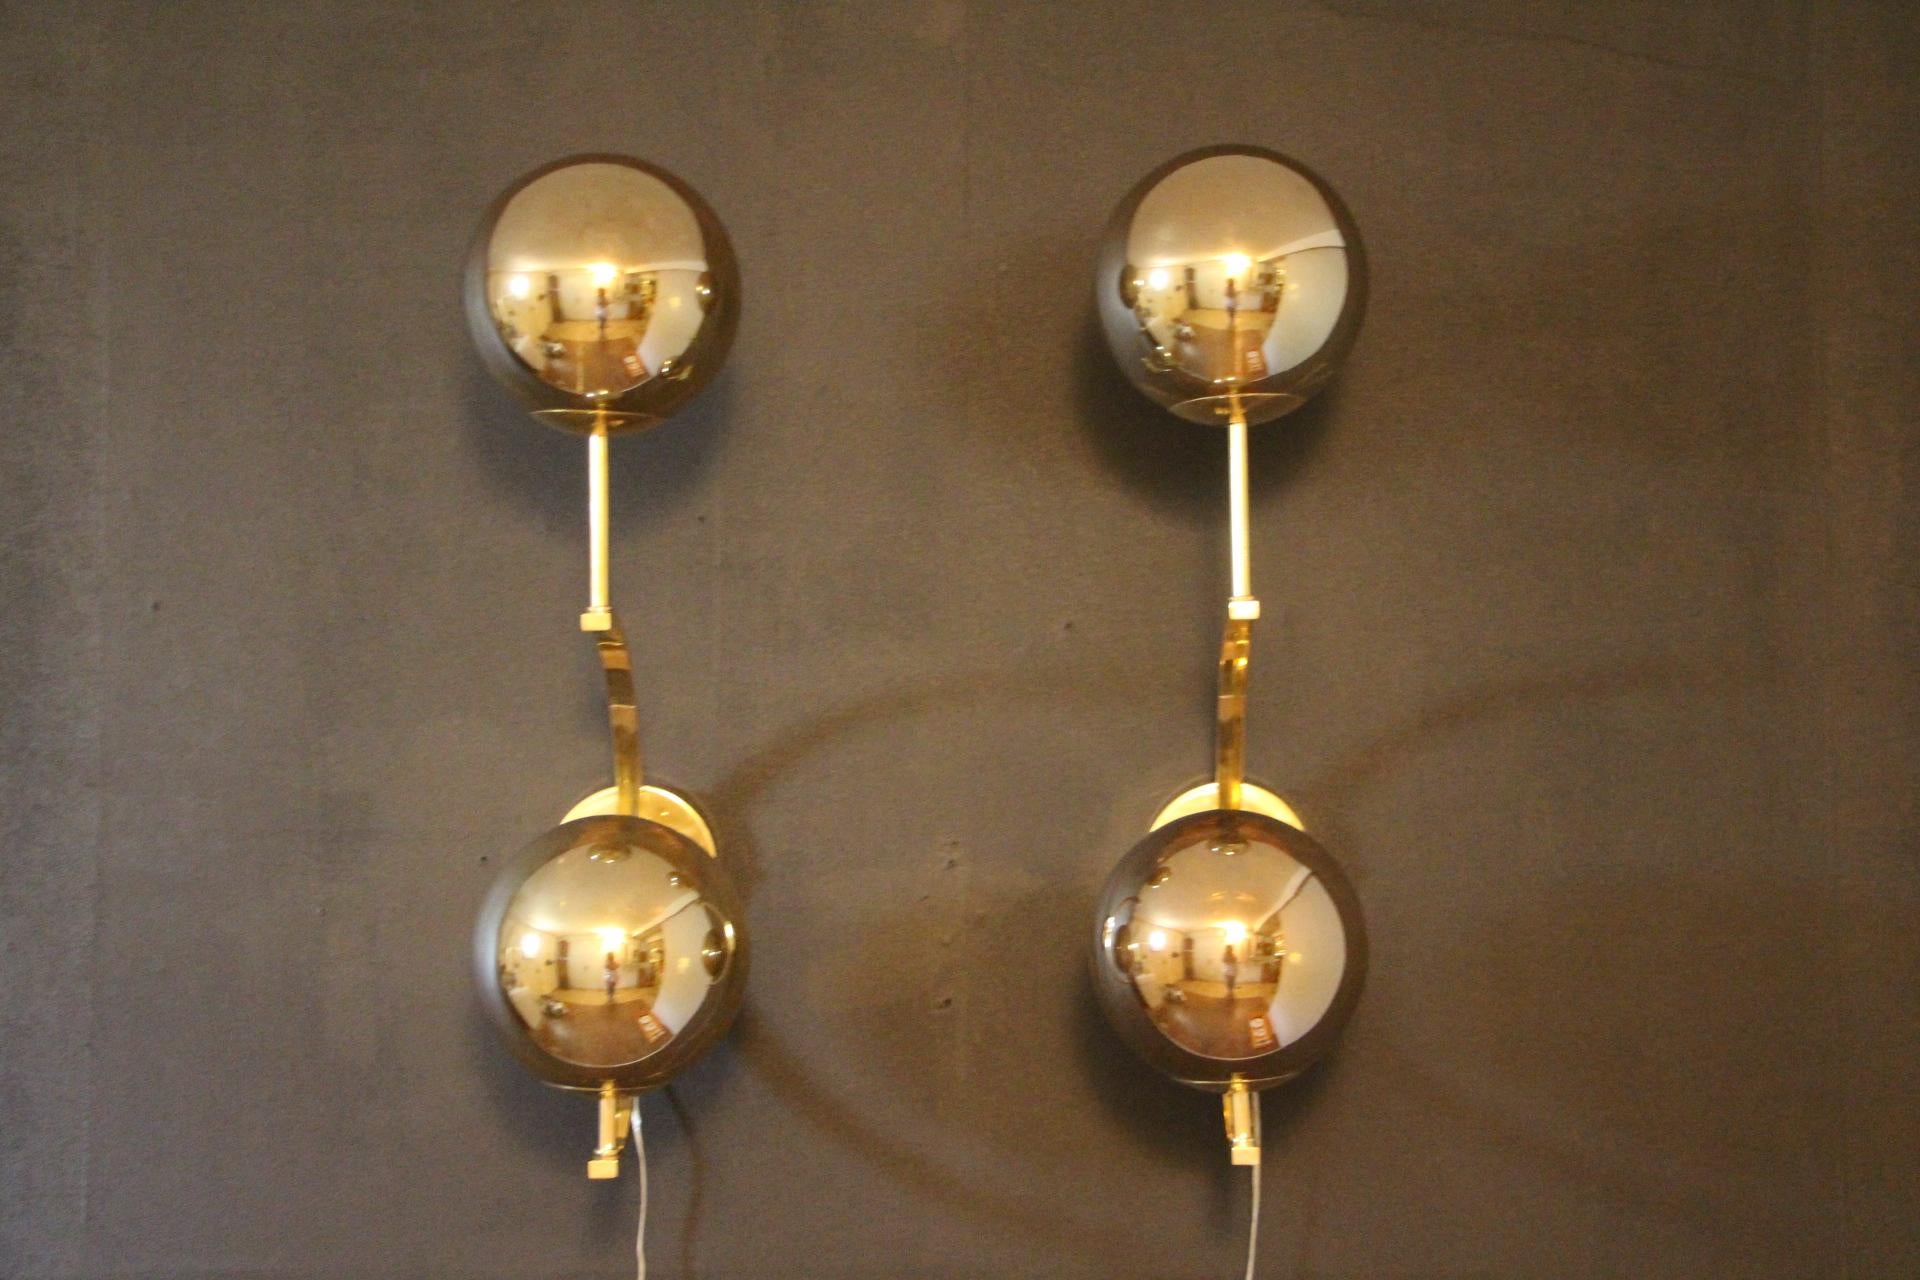 Modern Midcentury Pair of Brass and Gold Mercurised Glass Sconces Wall Lights For Sale 2